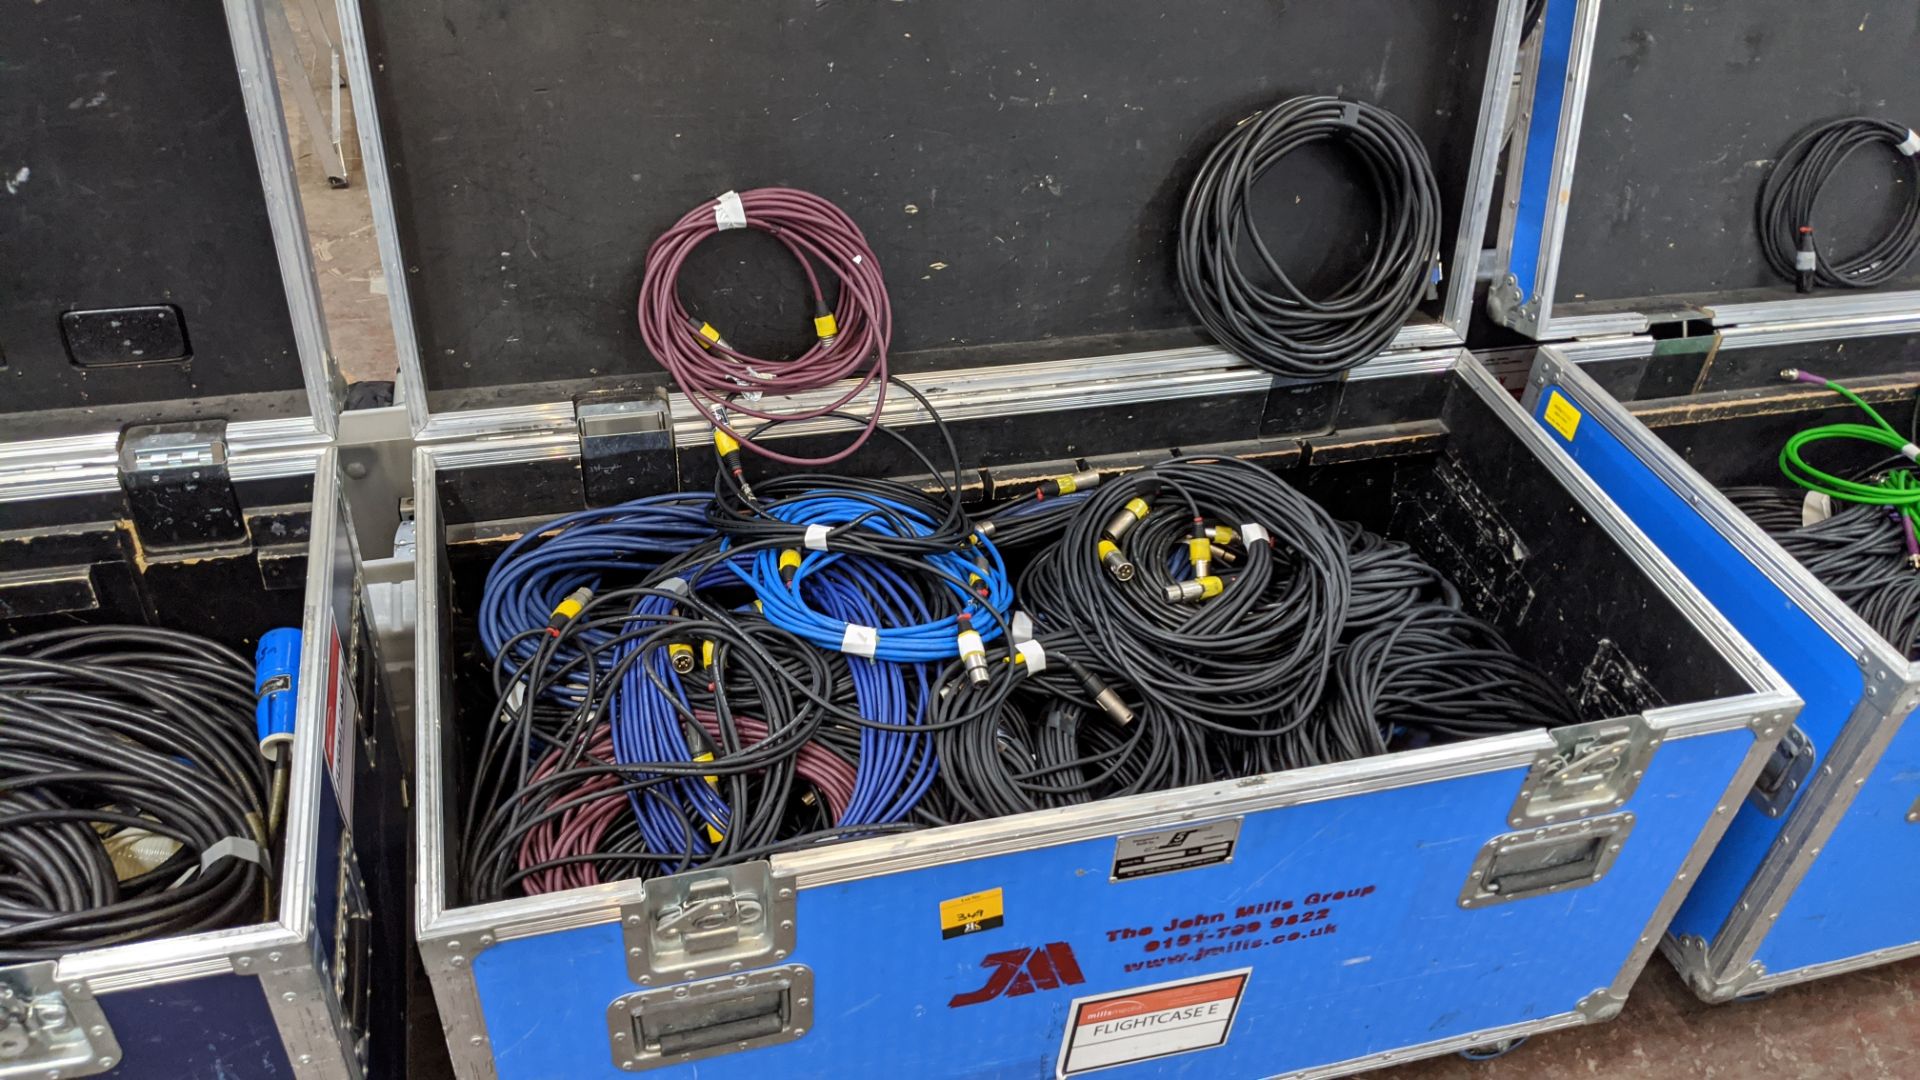 Large mobile flight case & contents of assorted XLR cables & similar Lots 51 - 480 comprise the - Image 2 of 10